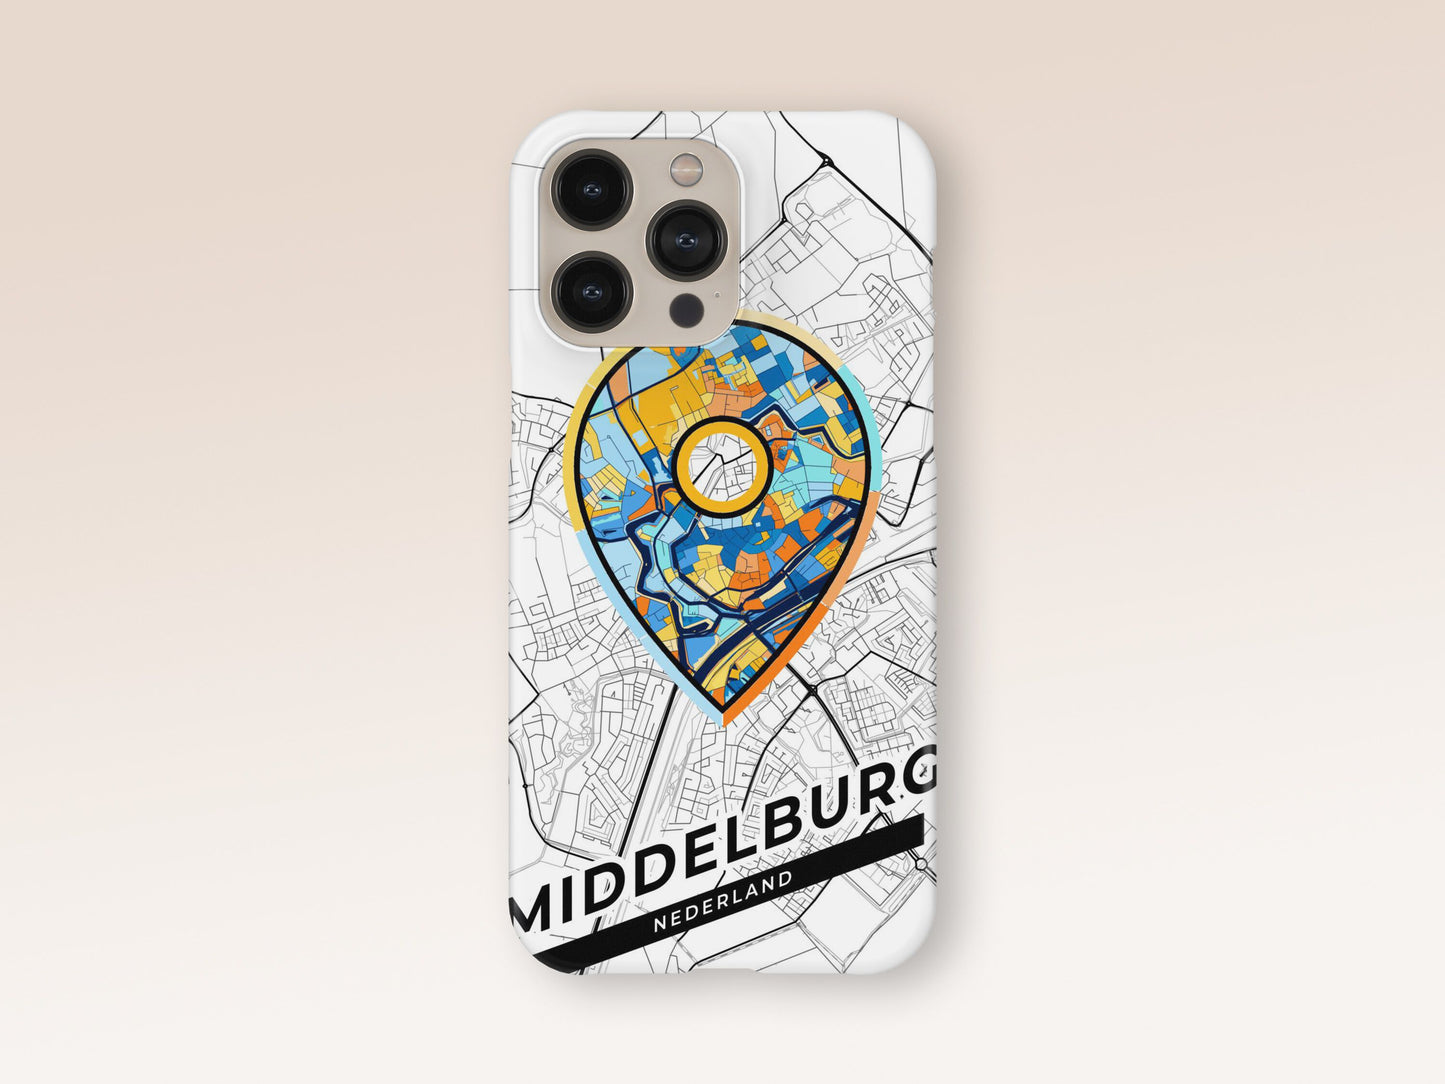 Middelburg Netherlands slim phone case with colorful icon 1